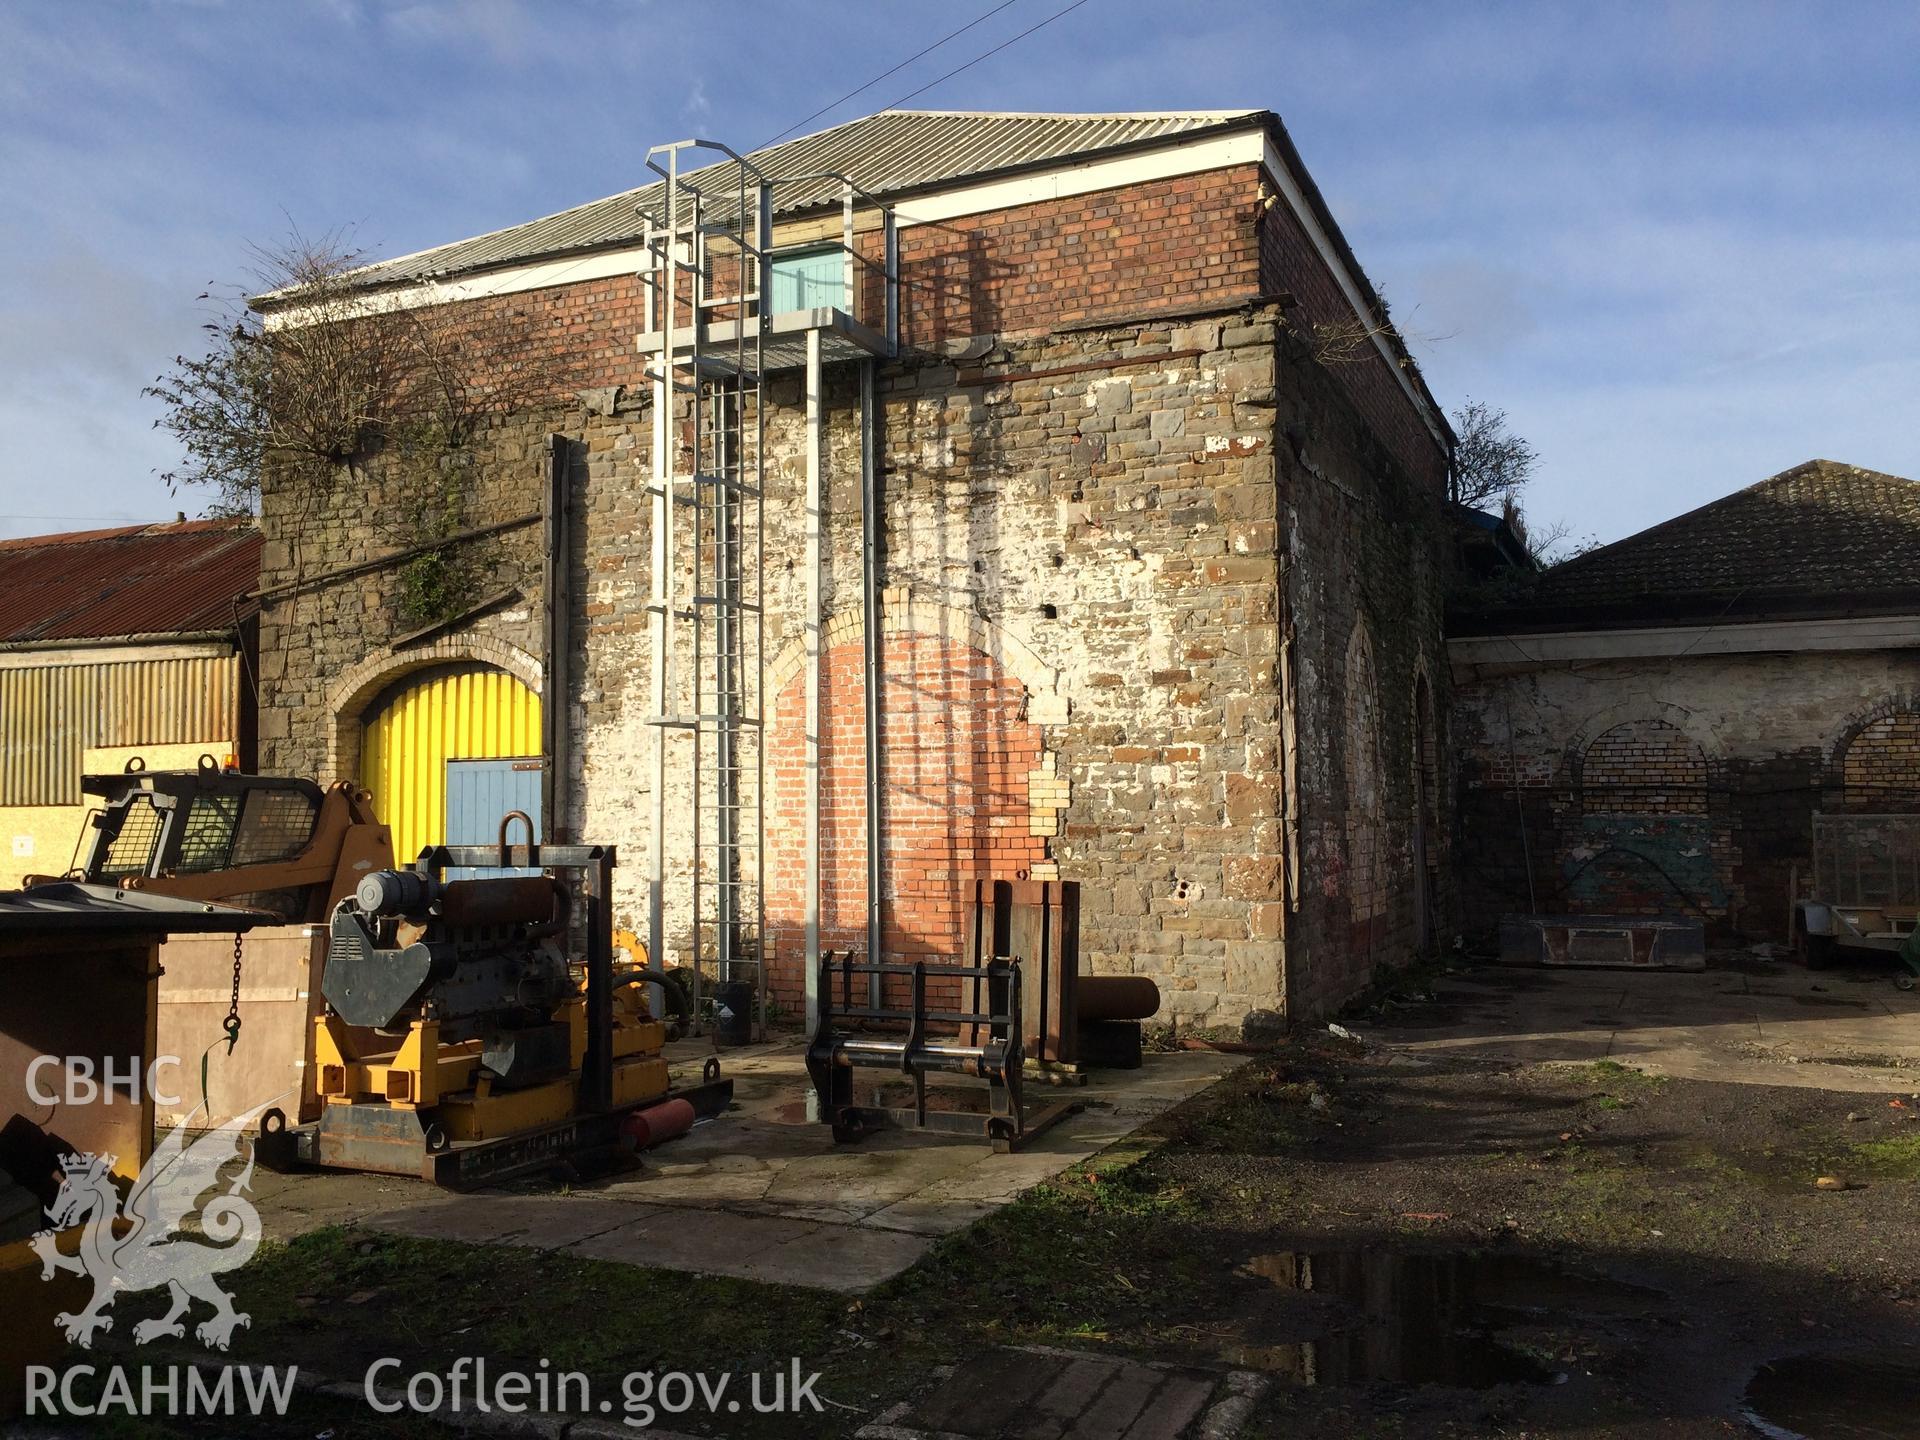 Photo showing Old Stores facing the graving dock at Newport Docks, taken by Paul R. Davis, 2017.